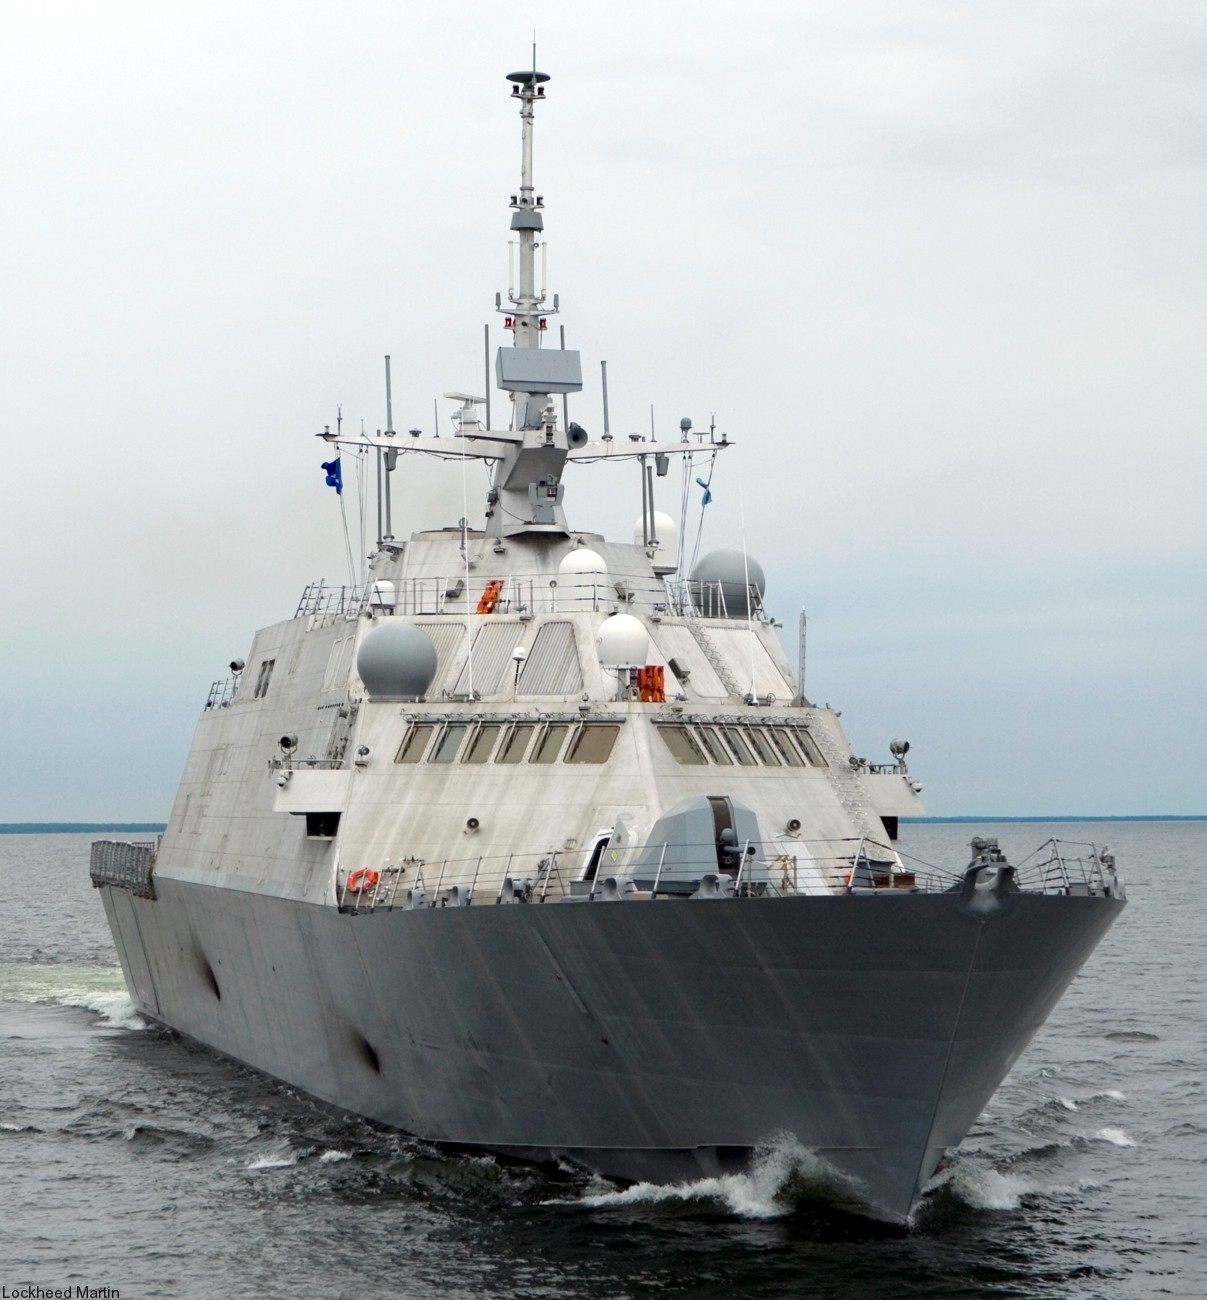 lcs-1 uss freedom class littoral combat ship us navy 135